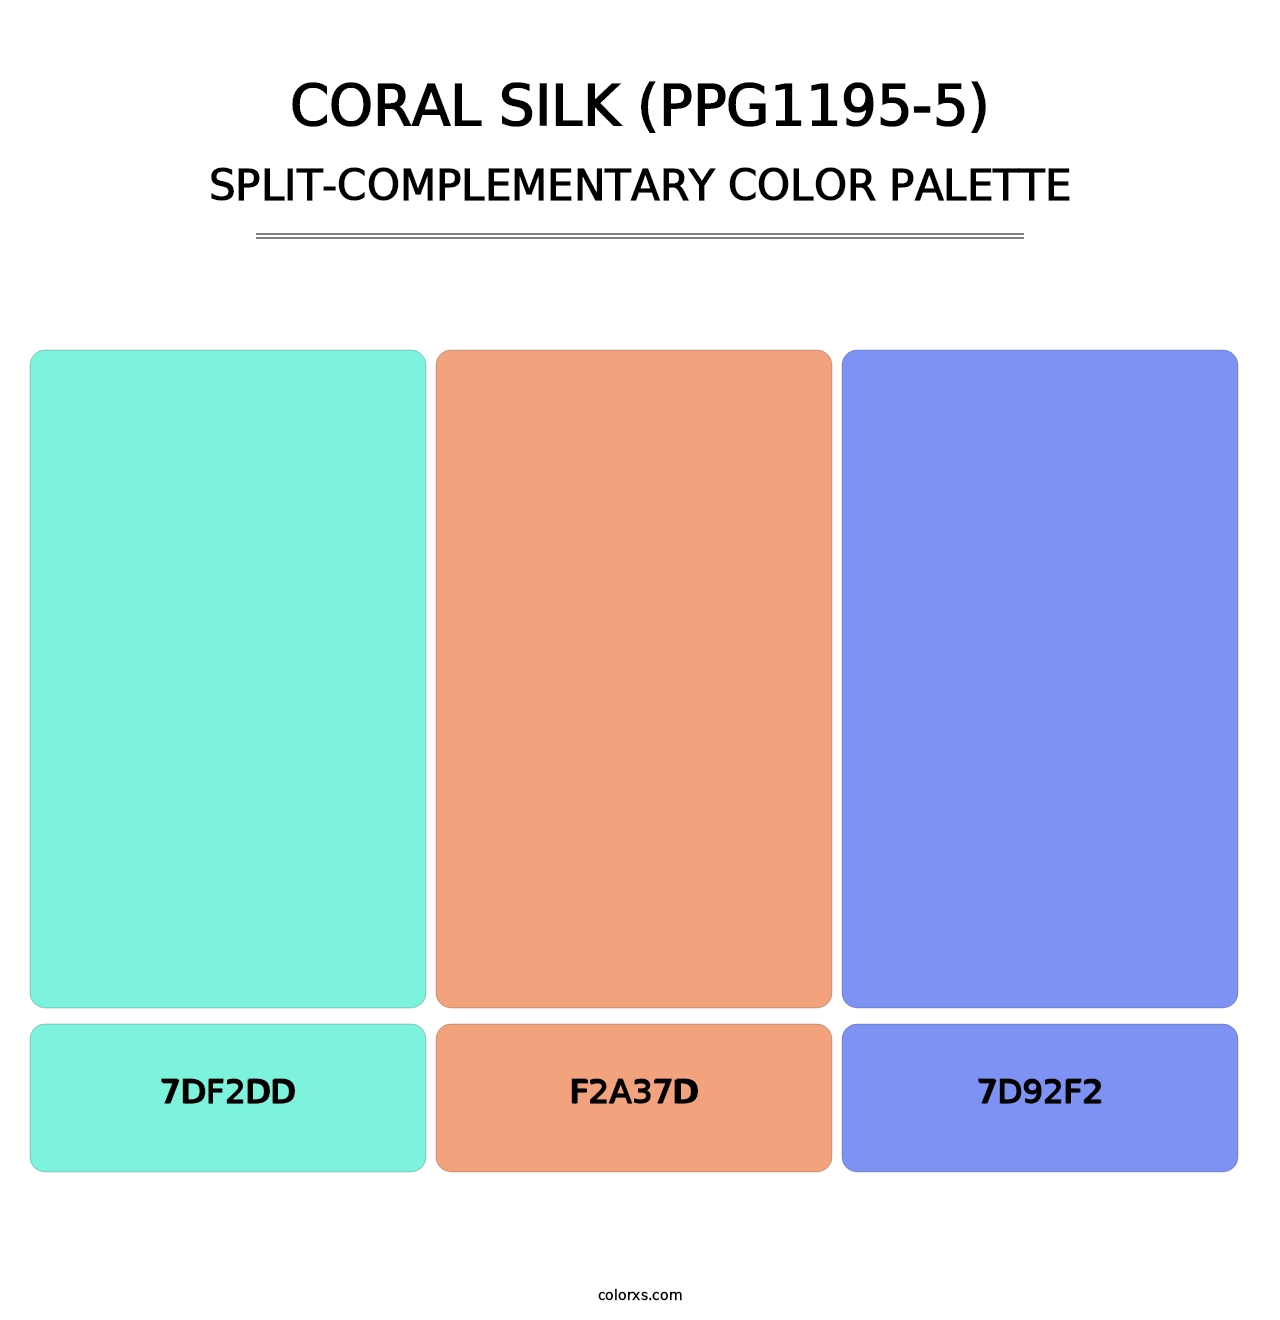 Coral Silk (PPG1195-5) - Split-Complementary Color Palette